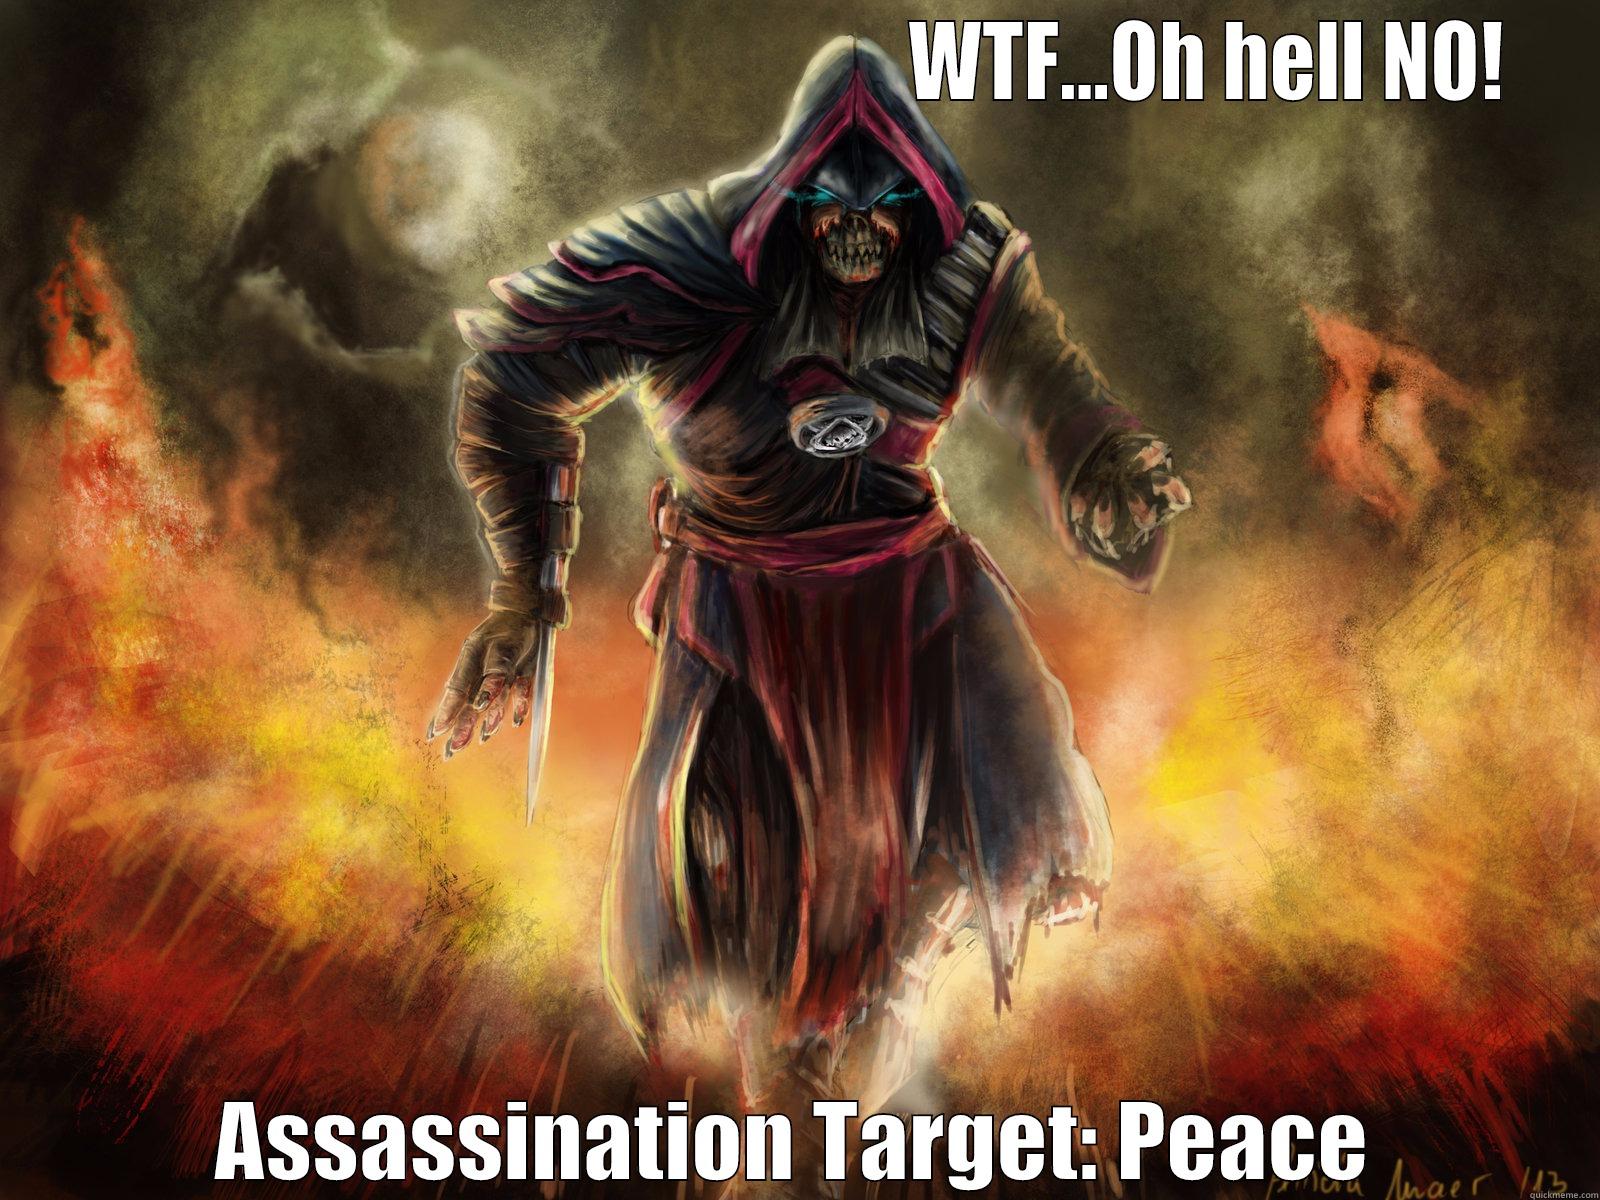                                                     WTF...OH HELL NO! ASSASSINATION TARGET: PEACE Misc